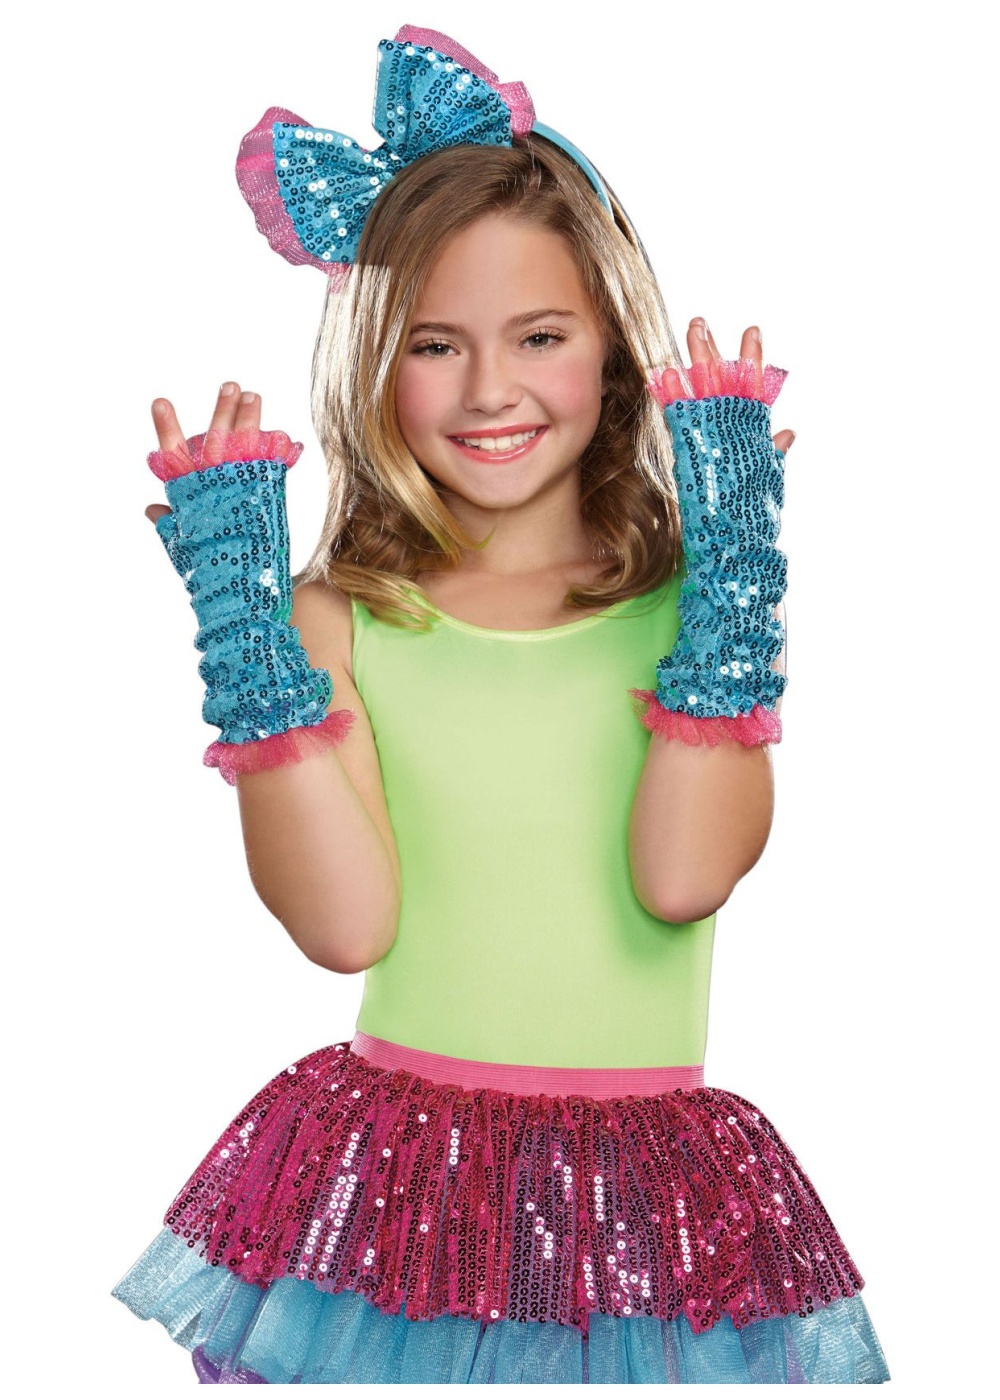  Girls Arm Warmers Turquoise